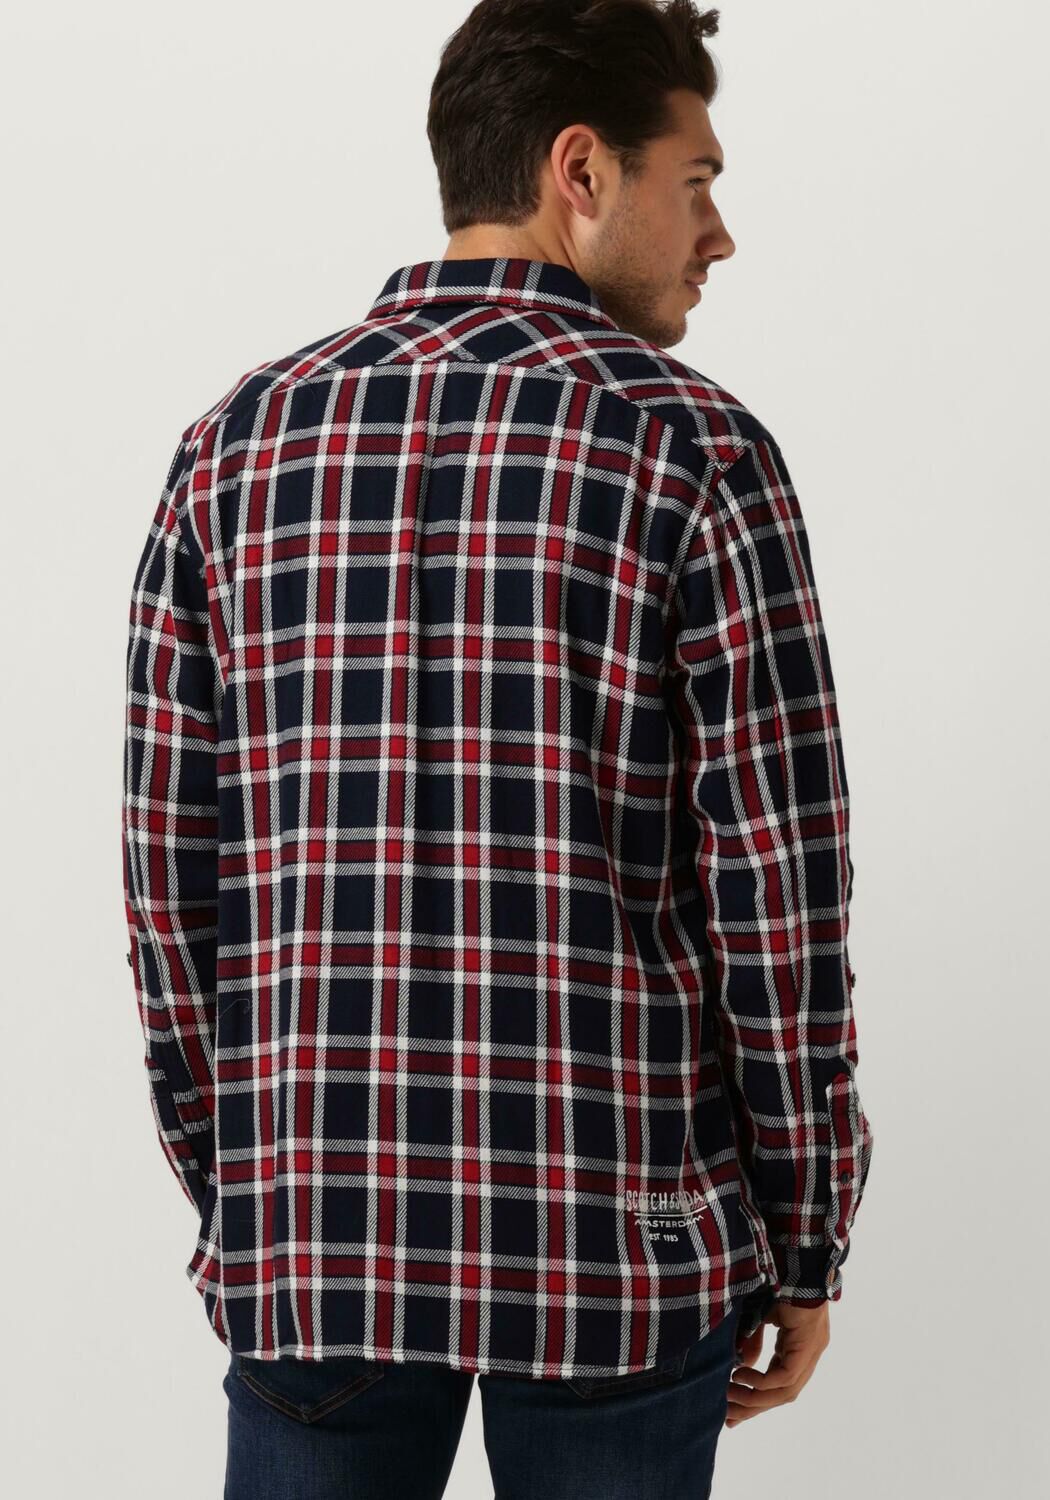 SCOTCH & SODA Heren Overhemden Archive Double Face Twill Check Donkerblauw